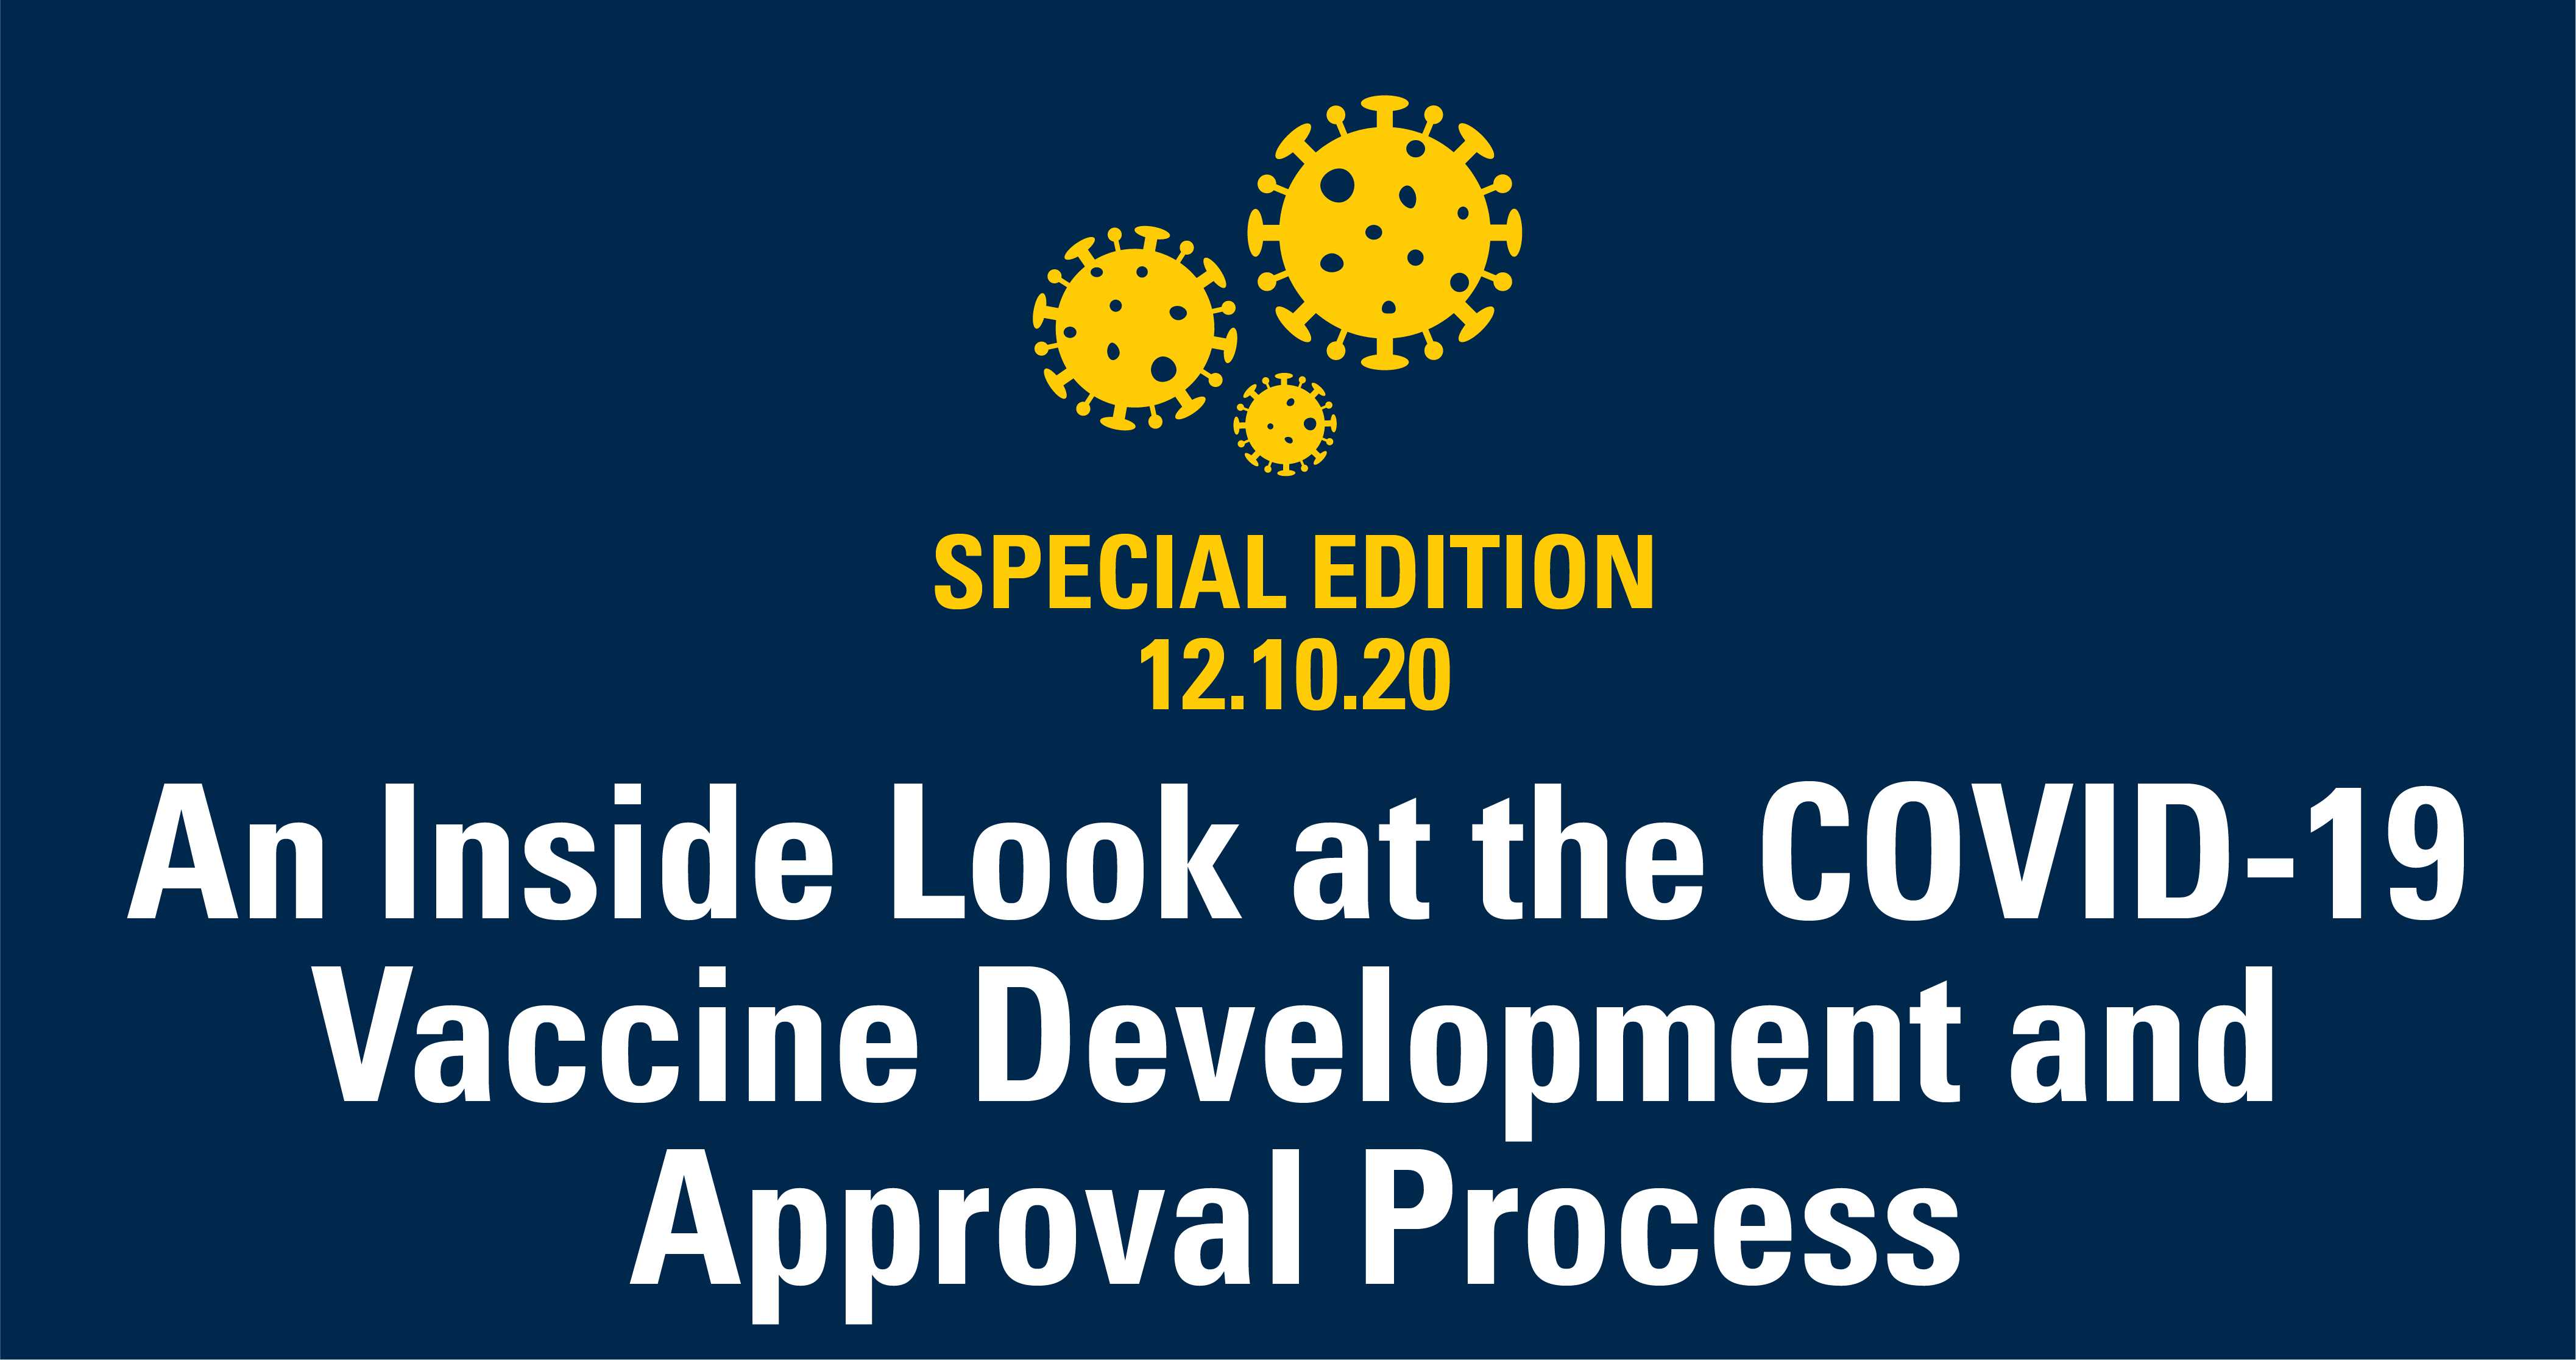 An Inside Look at the COVID-19 Vaccine Development and Approval Process